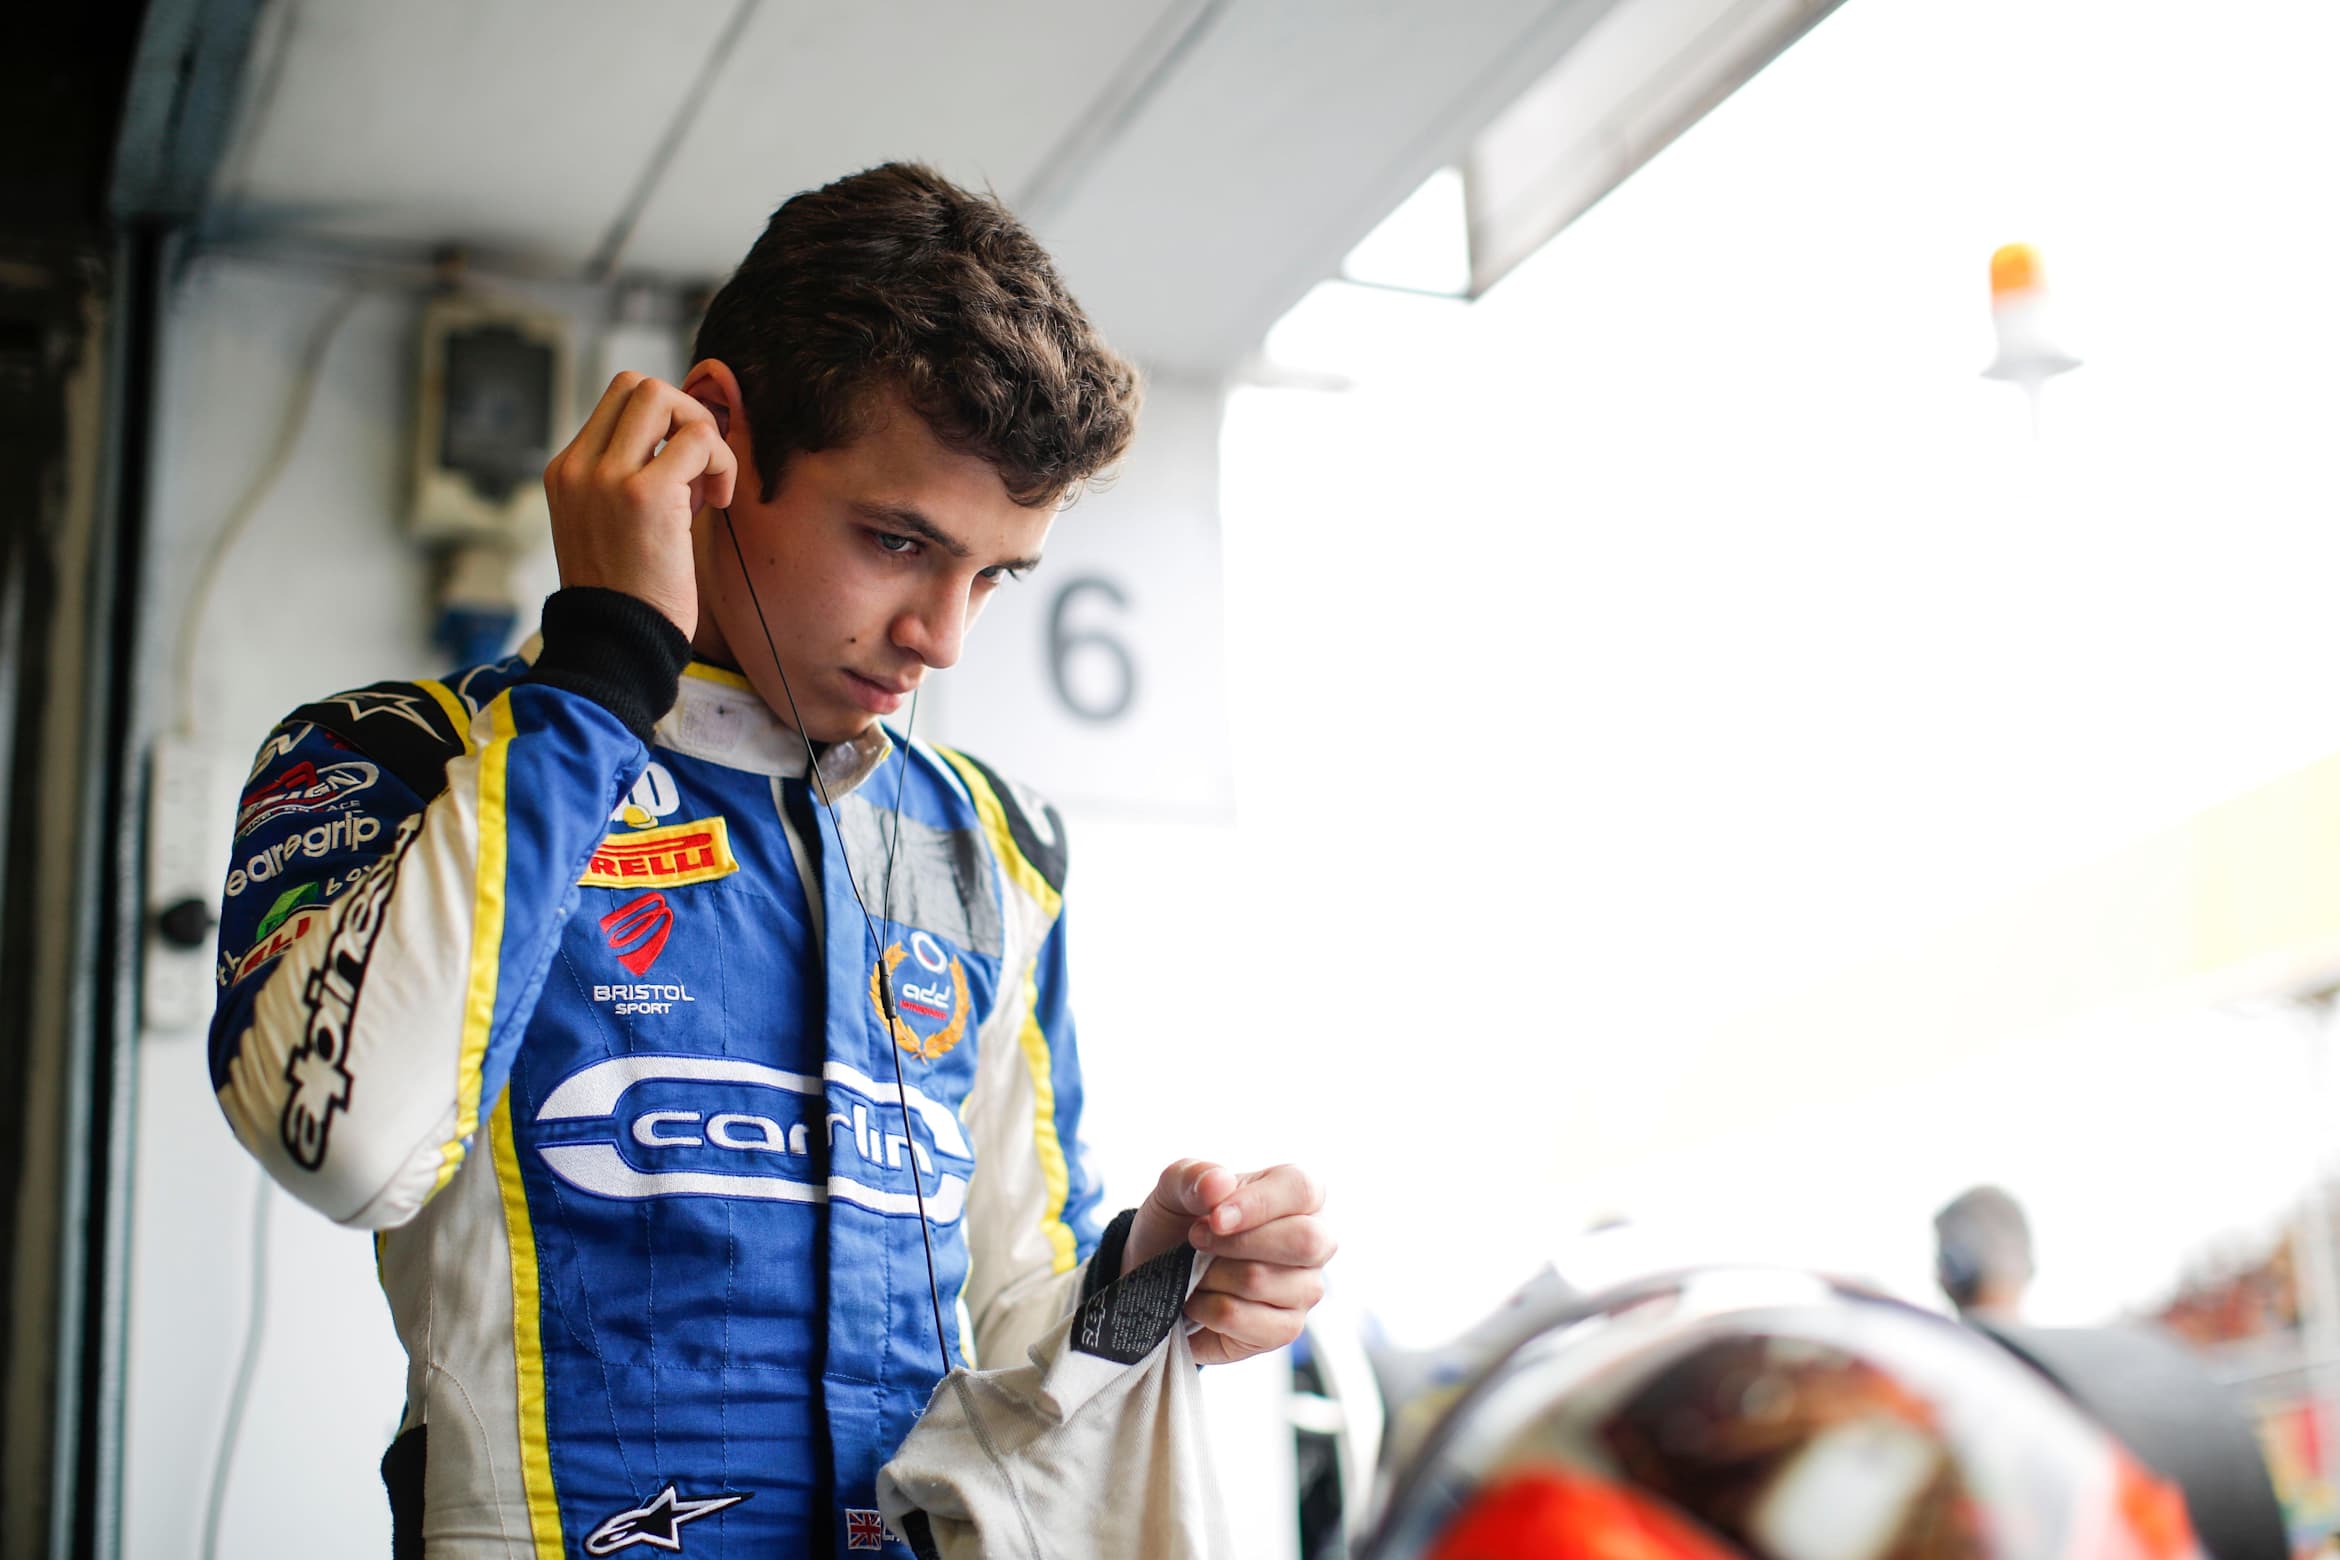 Lando Norris & tips on how to get into karting — Teletype